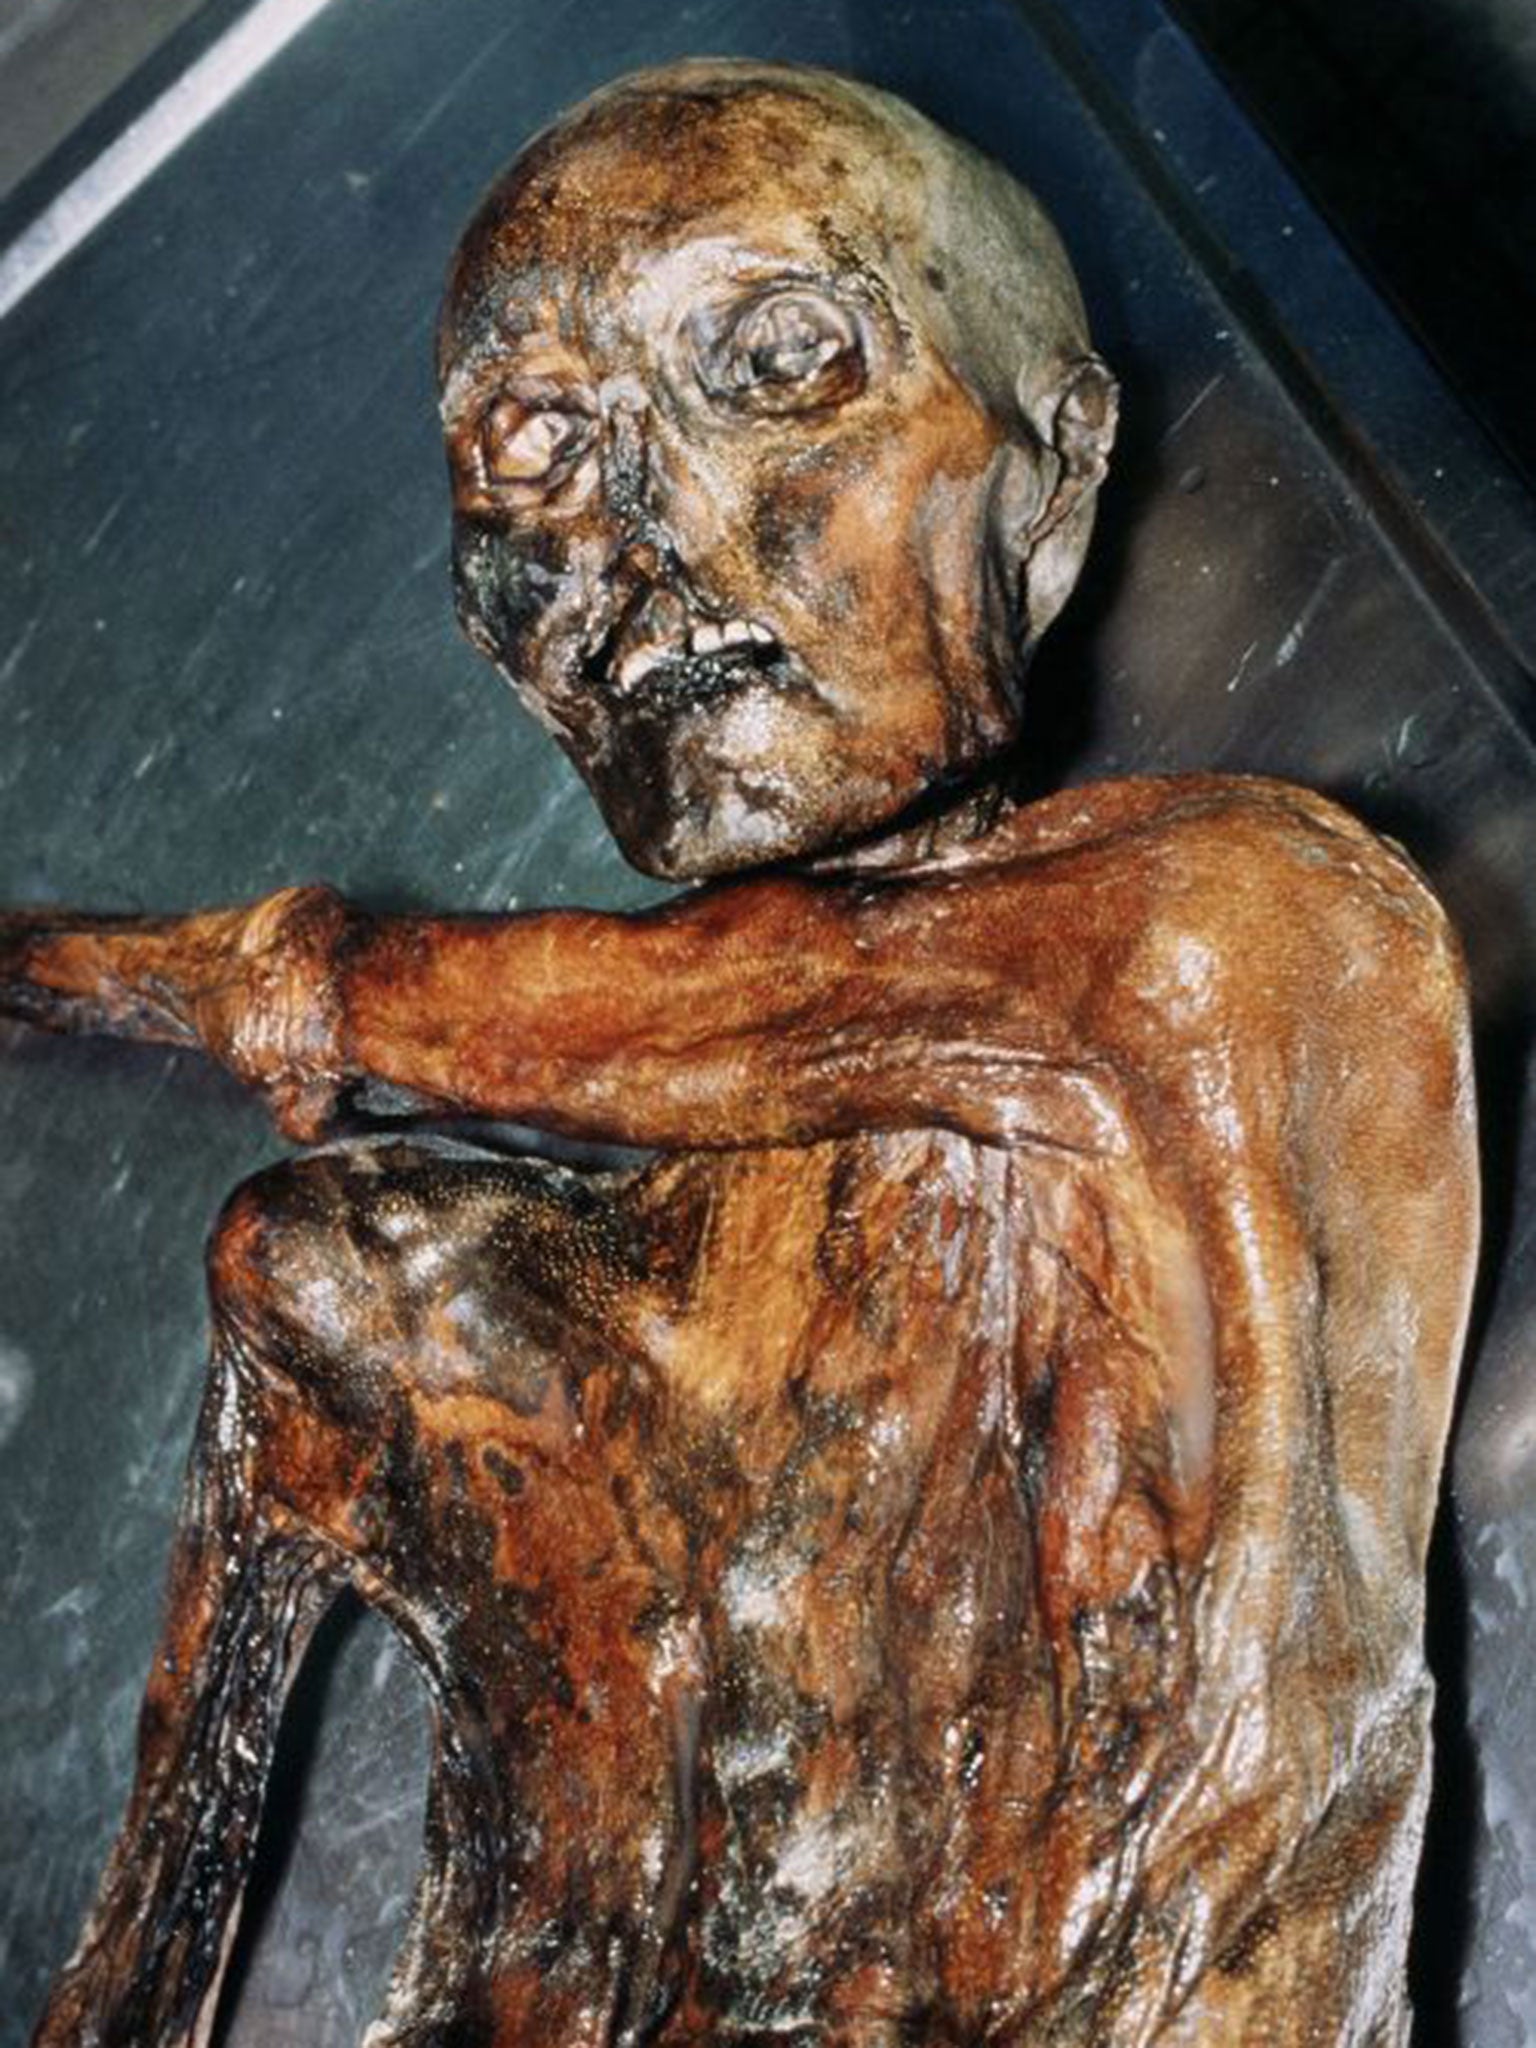 The discovery of Ötzi in the Italian Alps in 1991 provided information about life in the Neolithic period